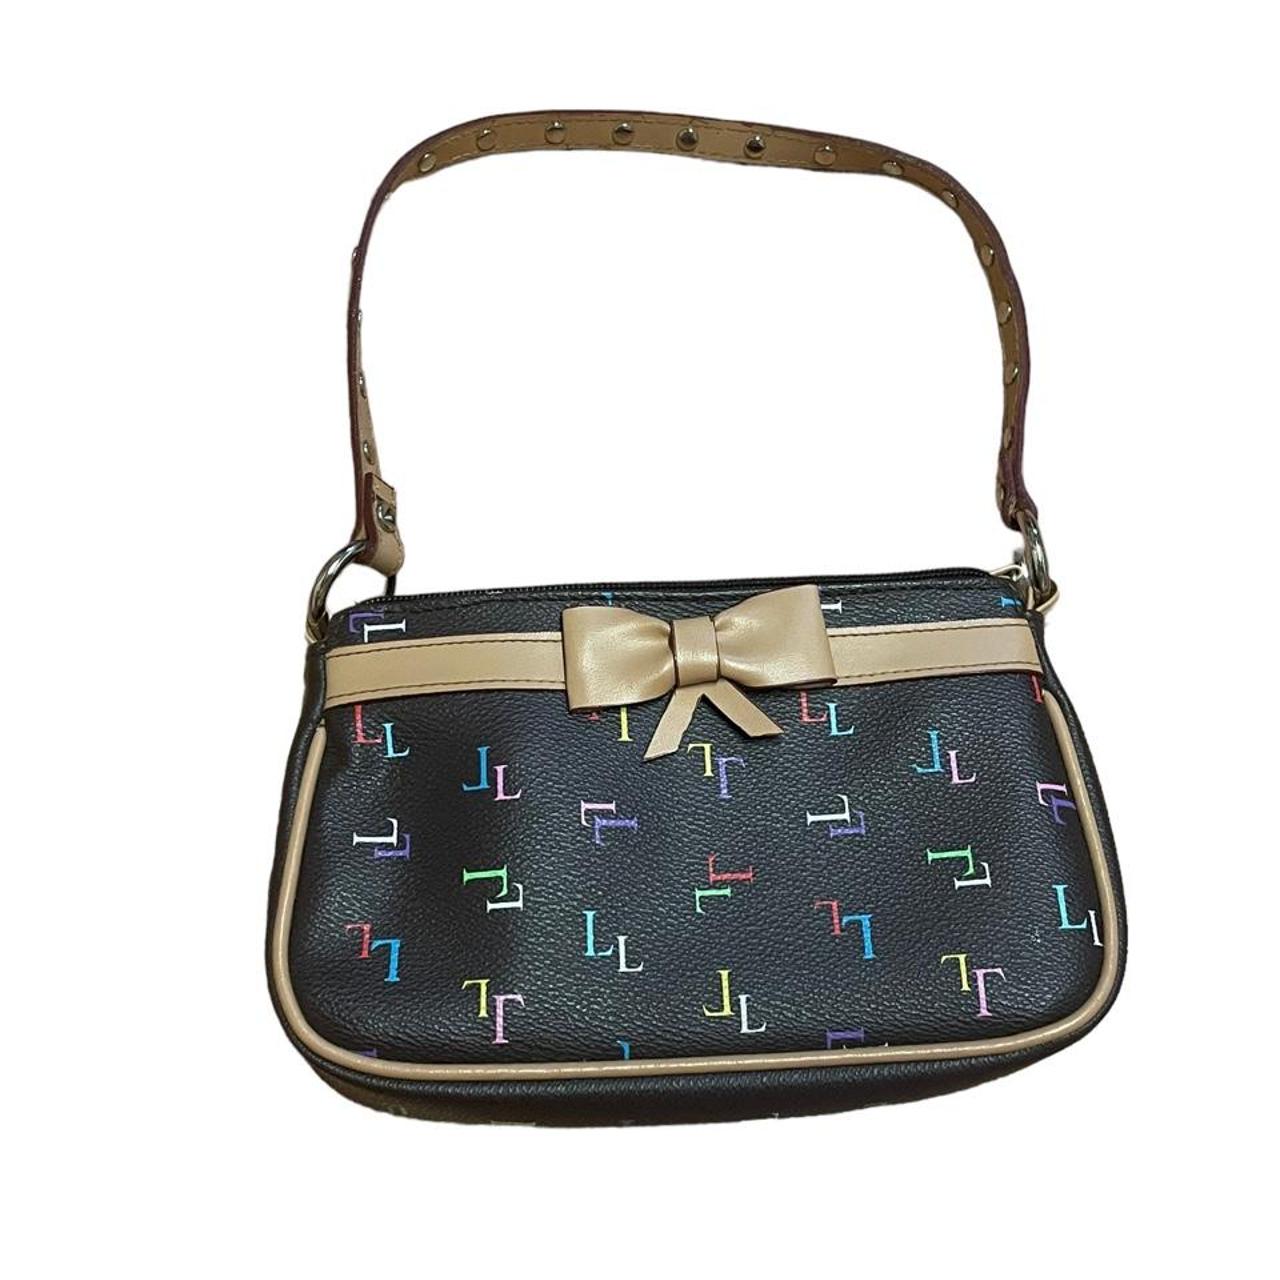 Limited Too Women's Shoulder Bags - Multi